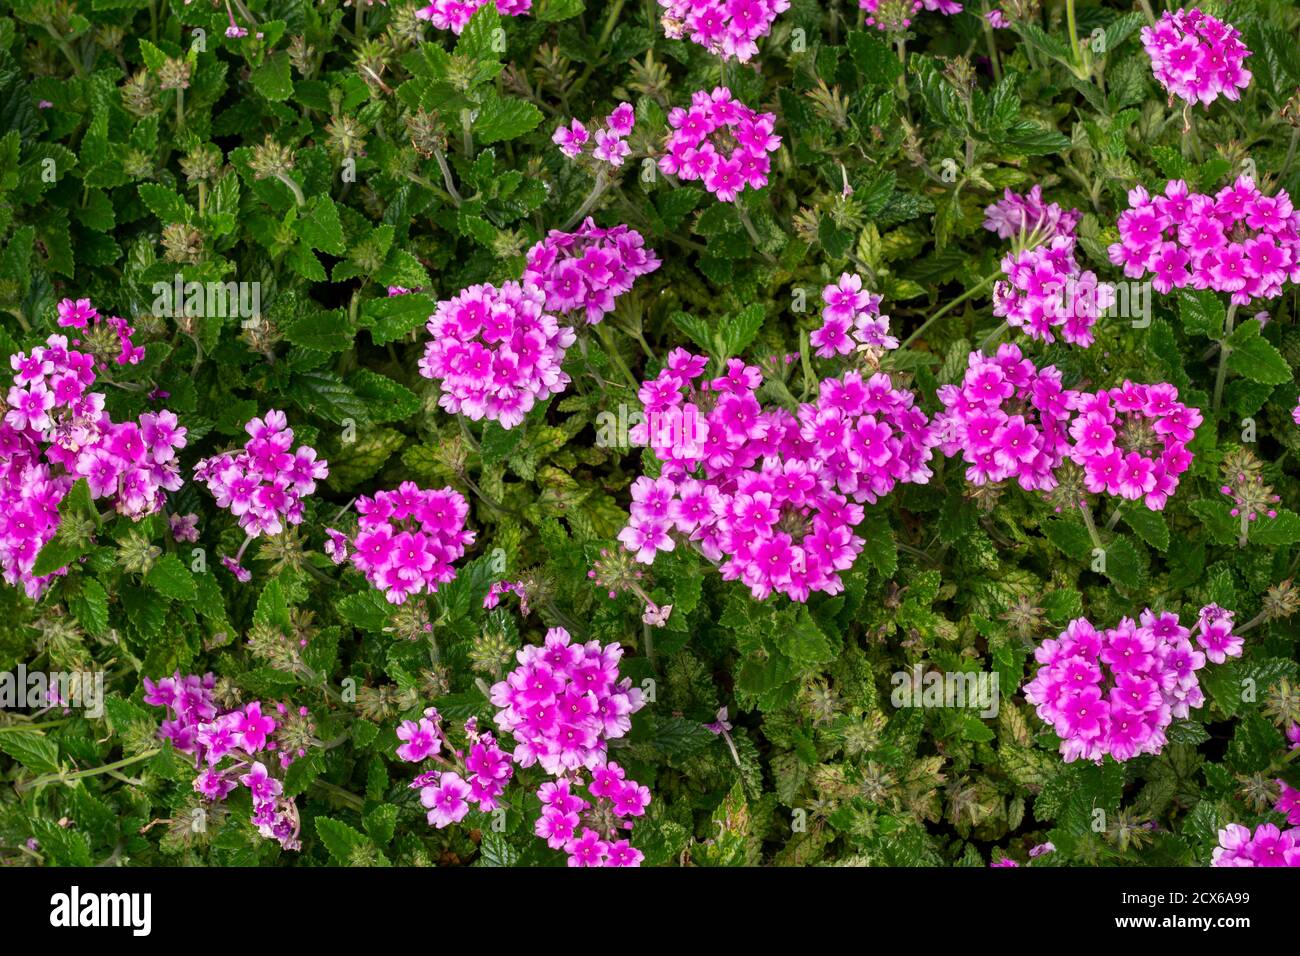 Close up full frame sunny ornamental garden view of clump rose verbena (verbena canadensis) flowers in full bloom Stock Photo